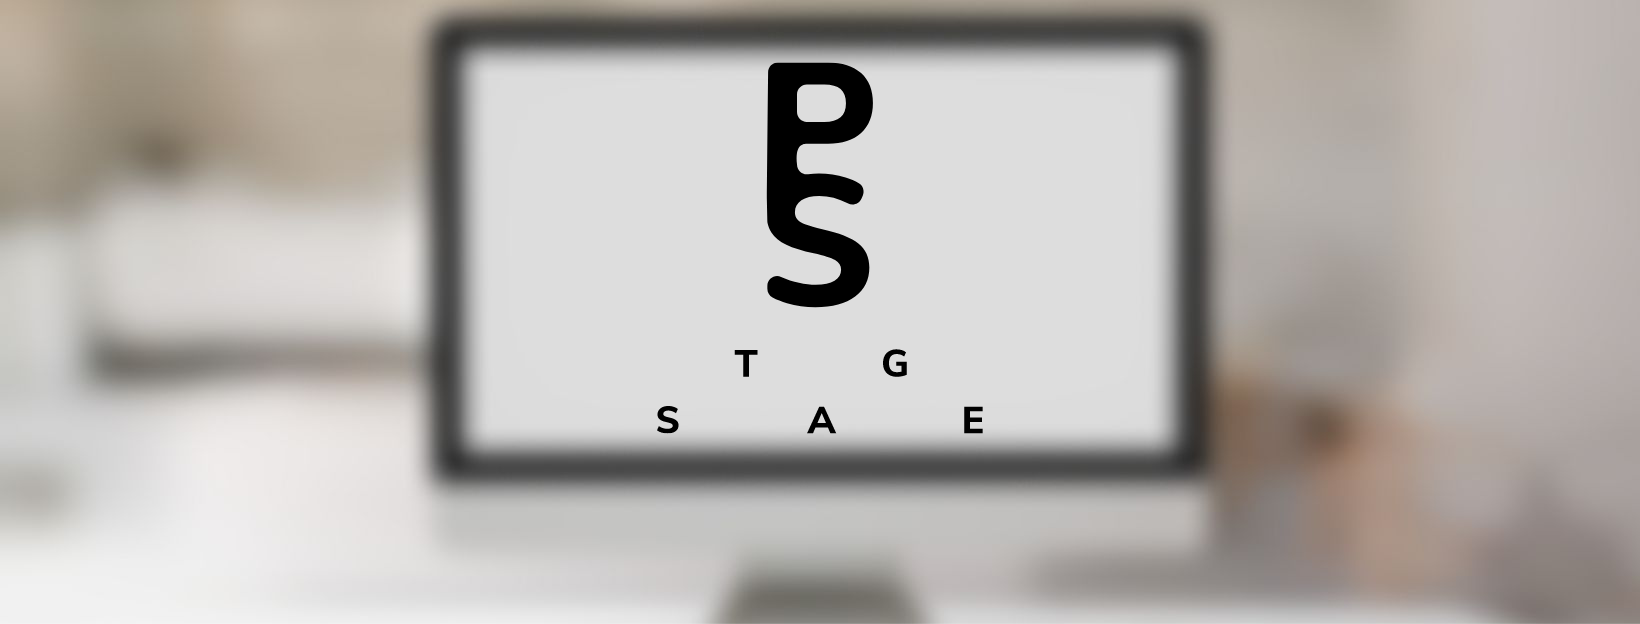 SEO positioning for PS-Stage